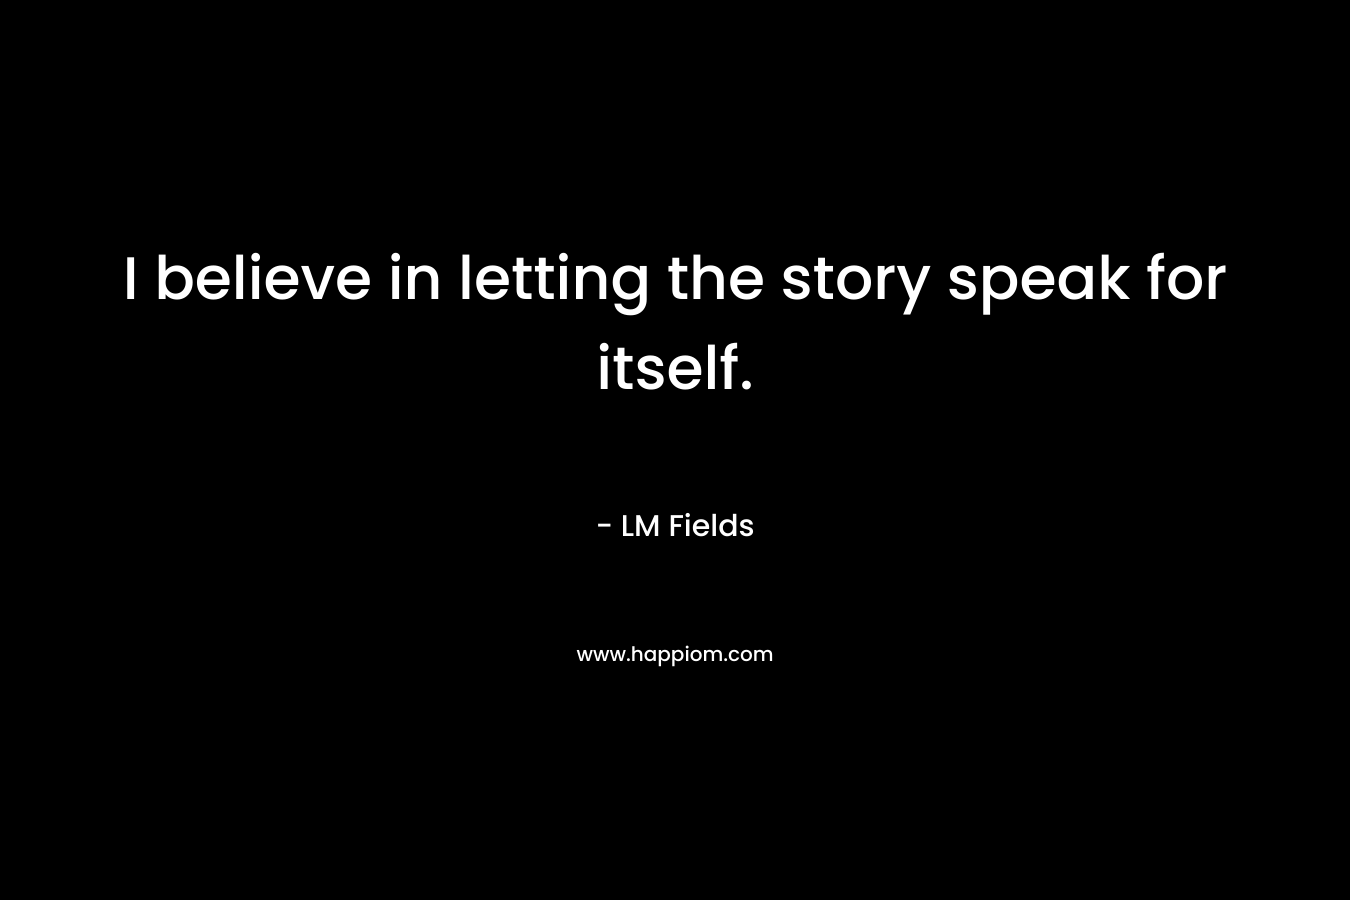 I believe in letting the story speak for itself.